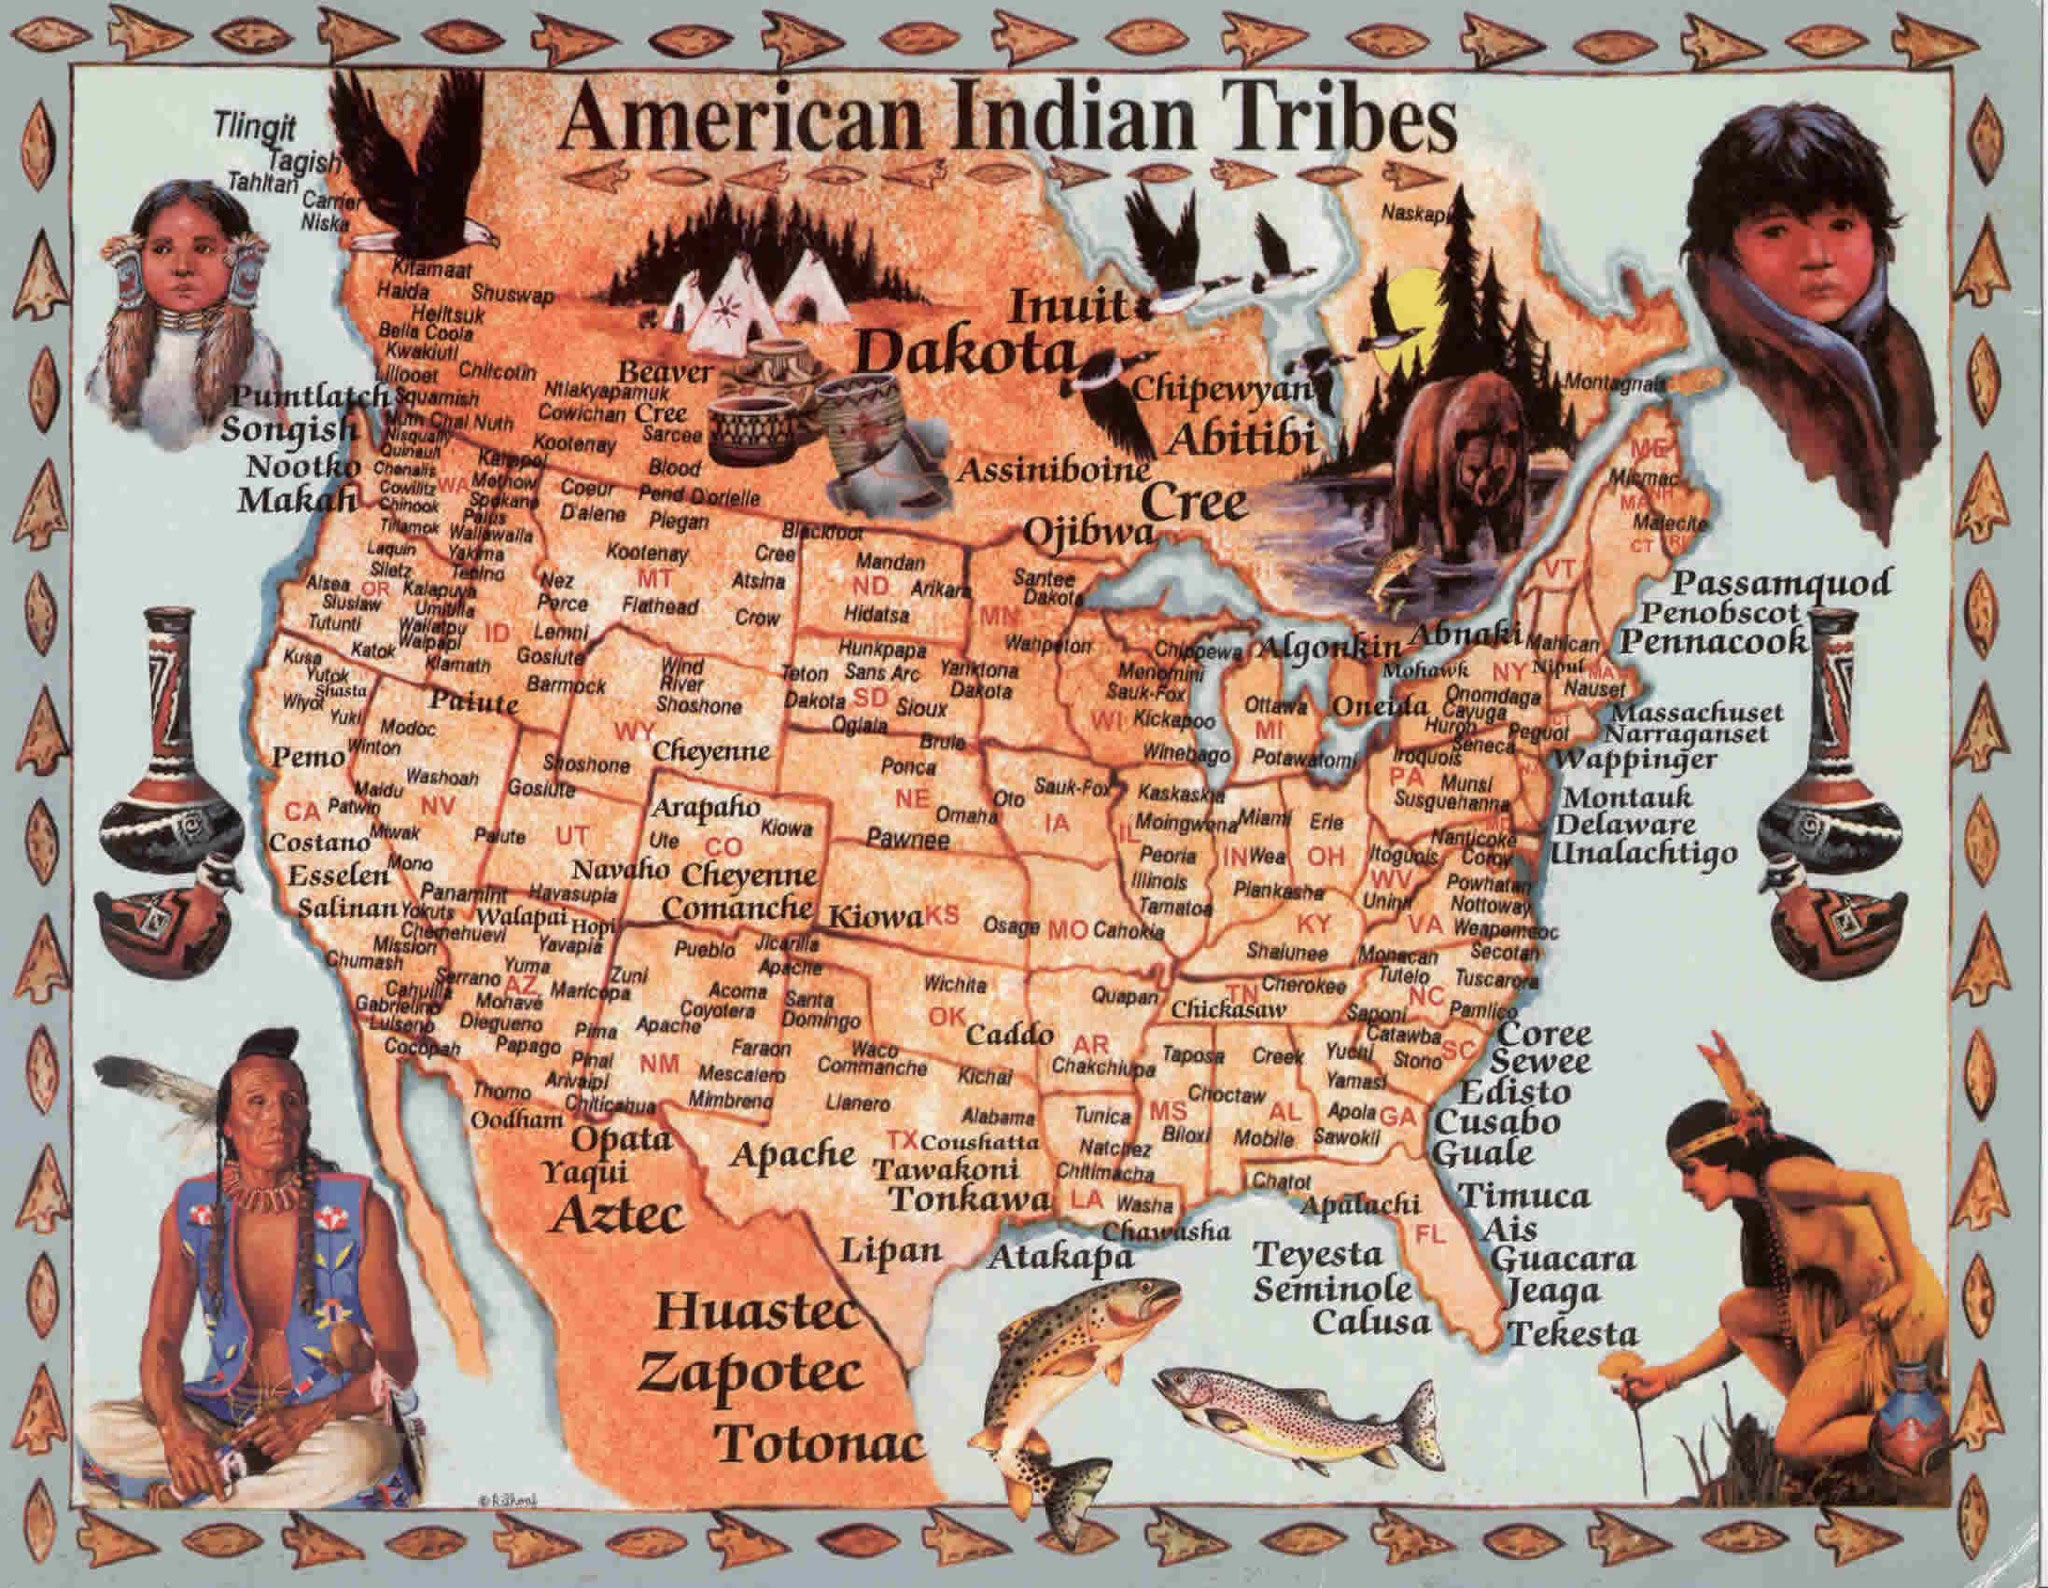 american indian tribes